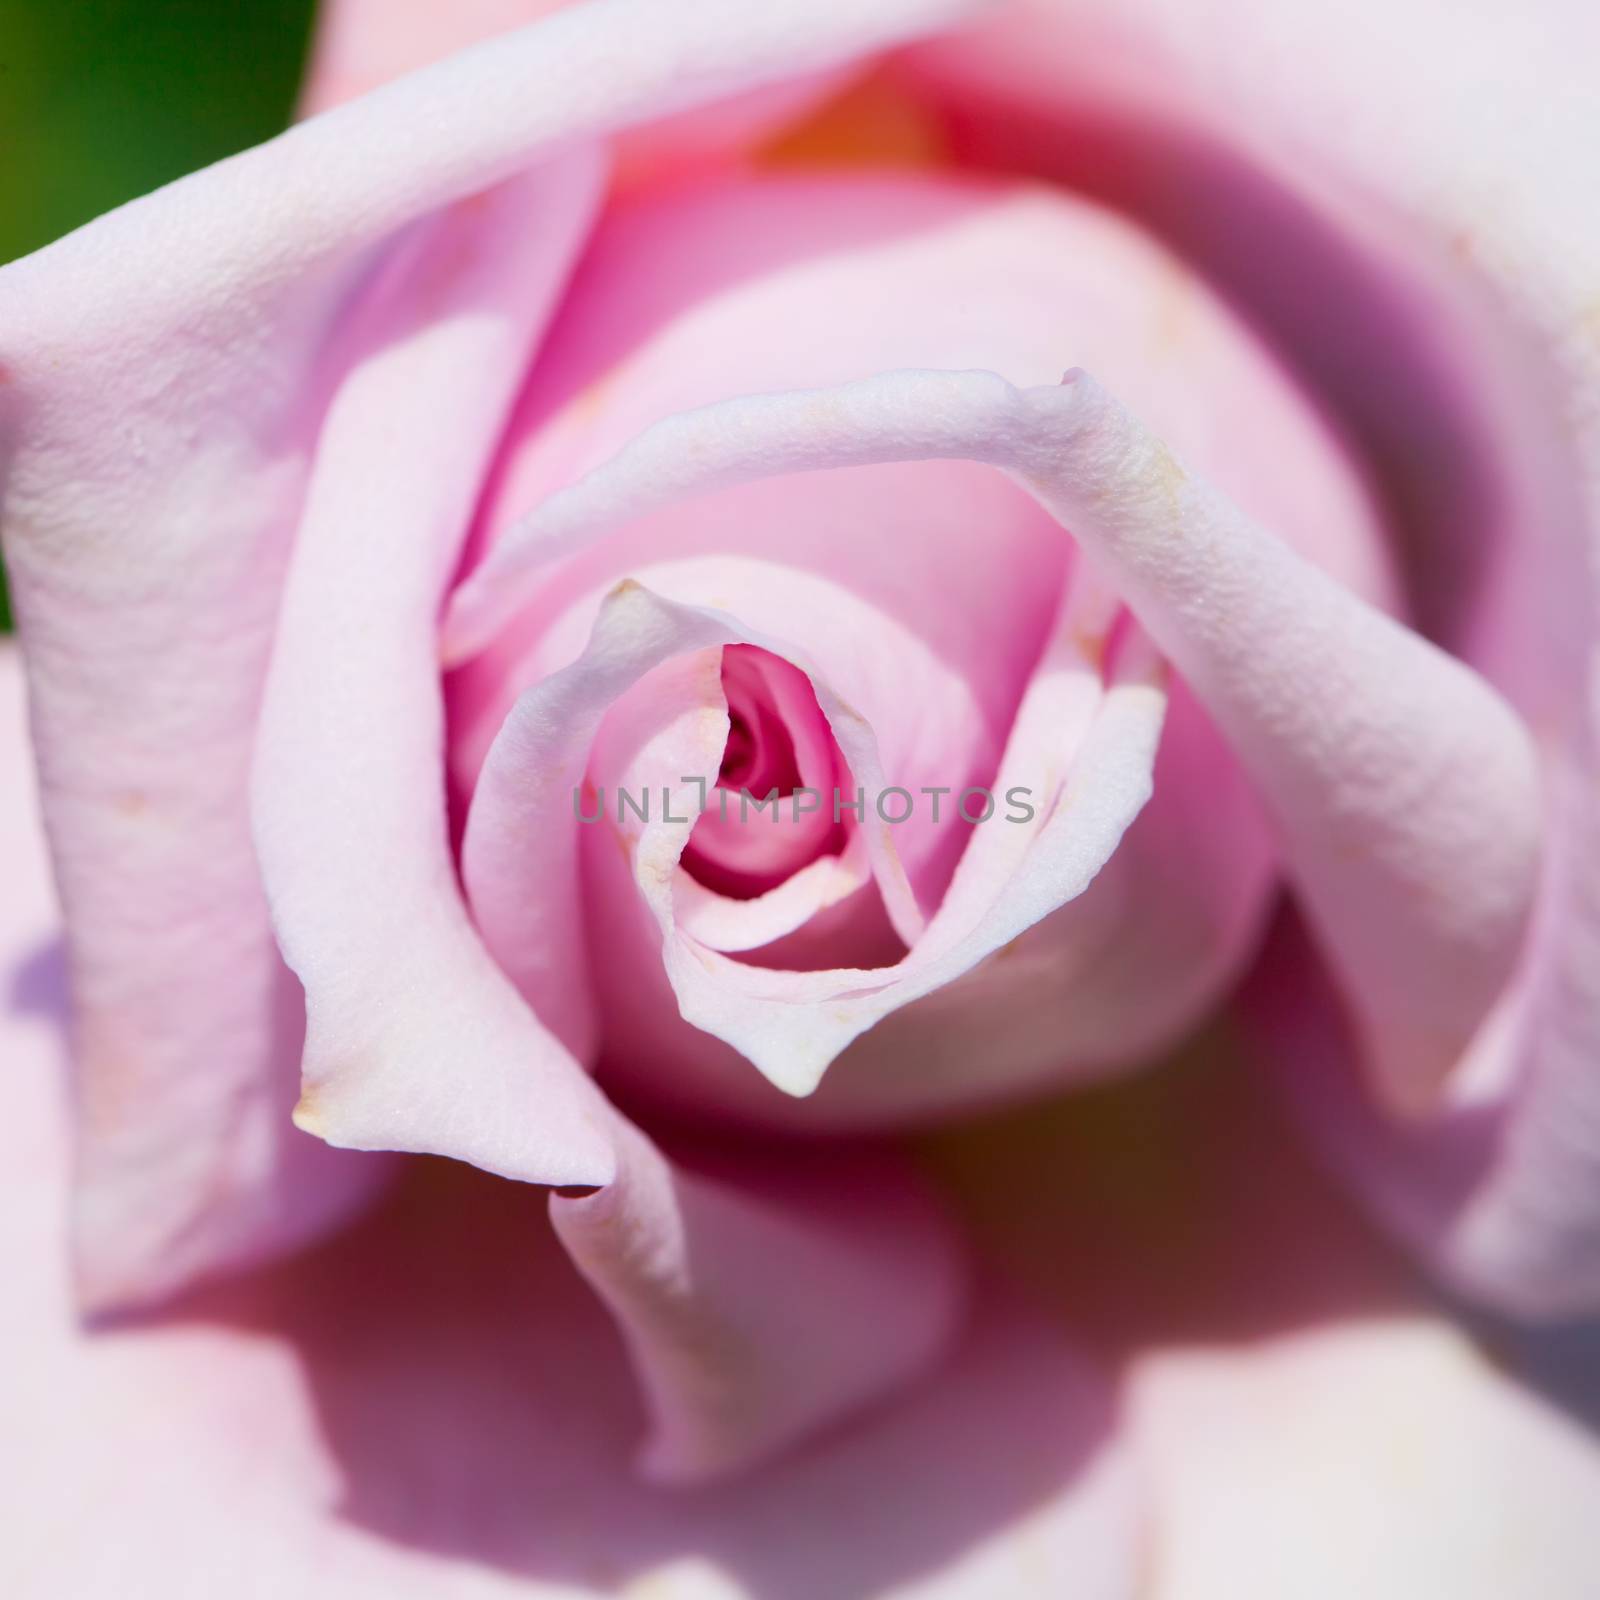 Pink rose by Koufax73